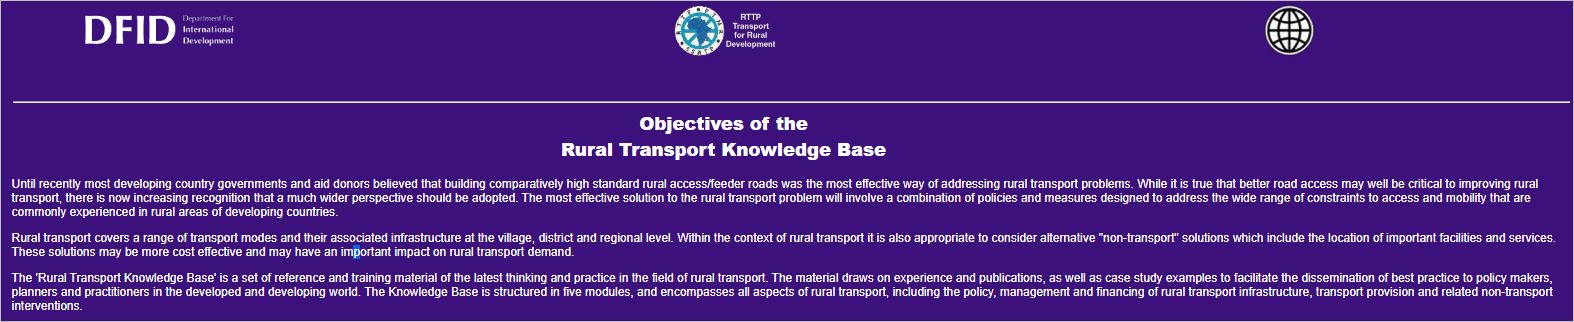 The Rural Transport Knowledge Base